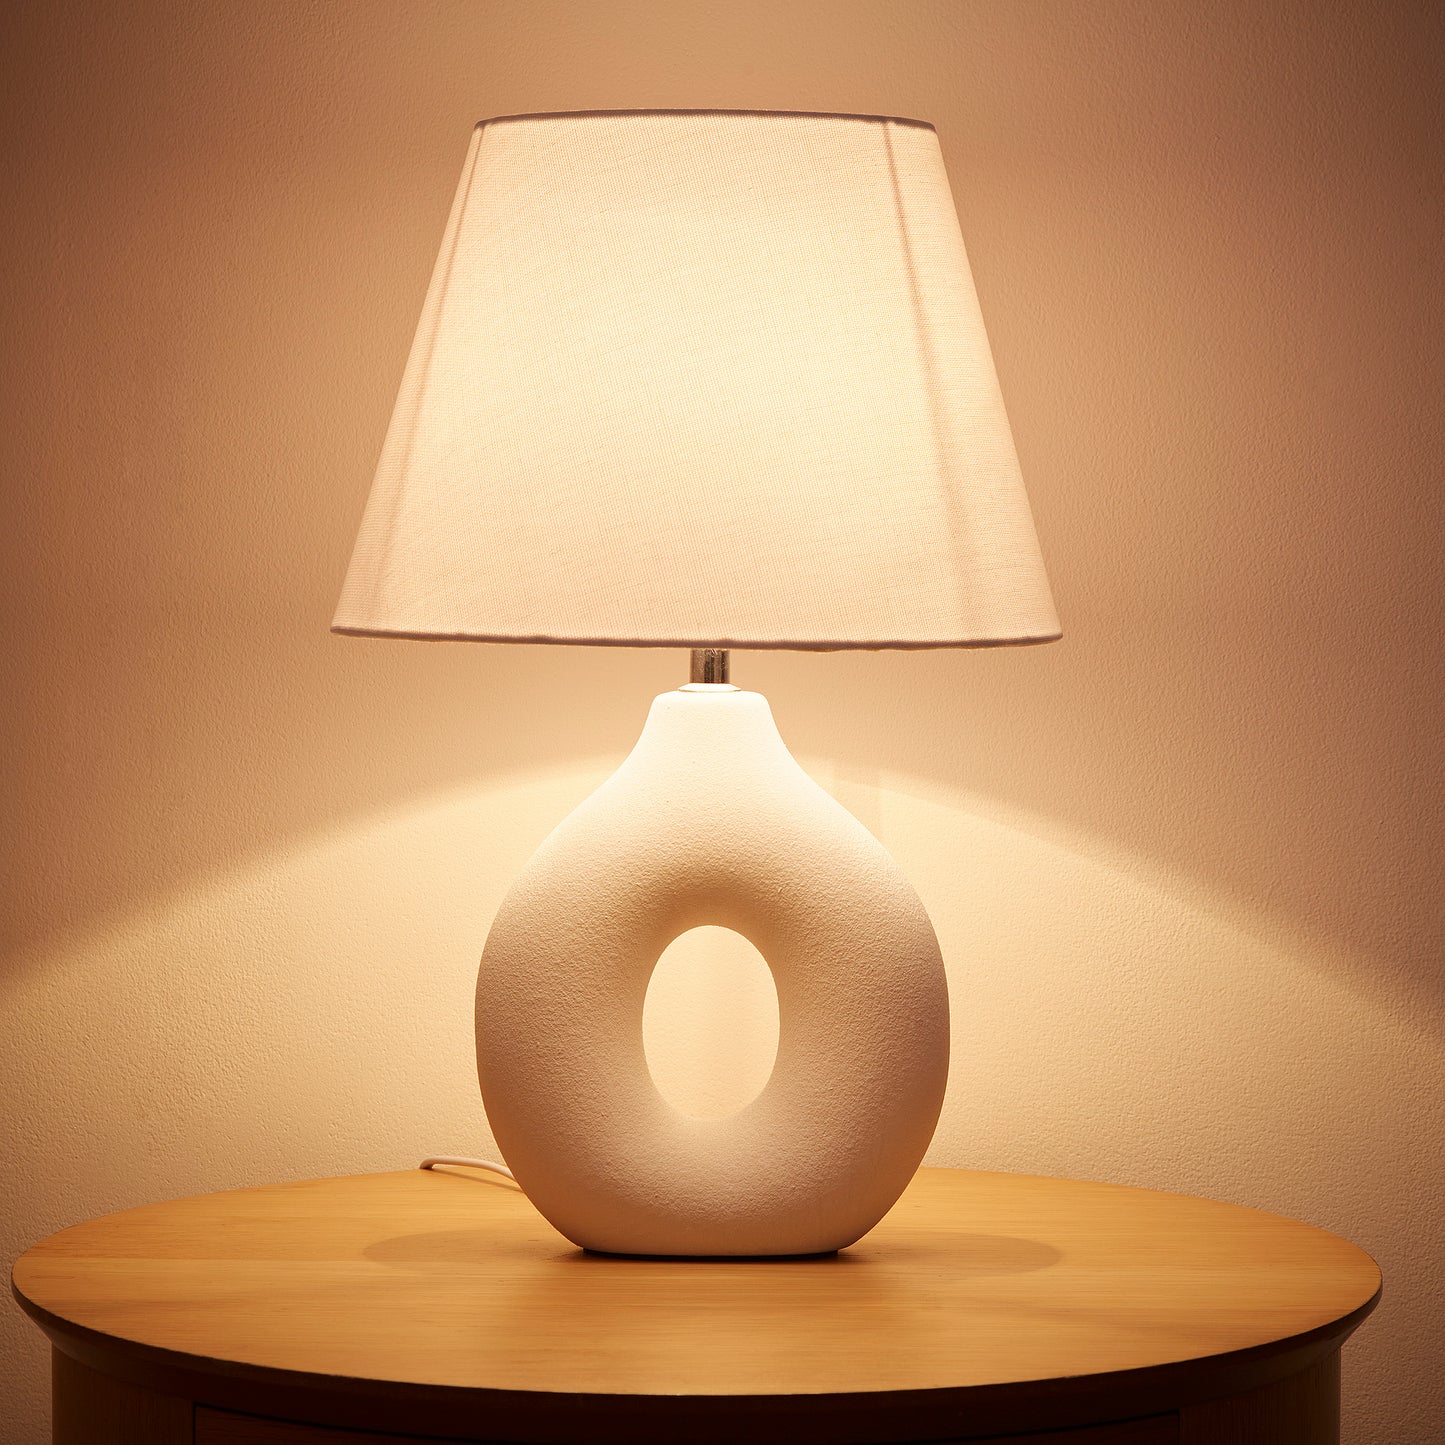 White Ceramic Table Lamp with a White Cotton Drum shade and decorative textured finish